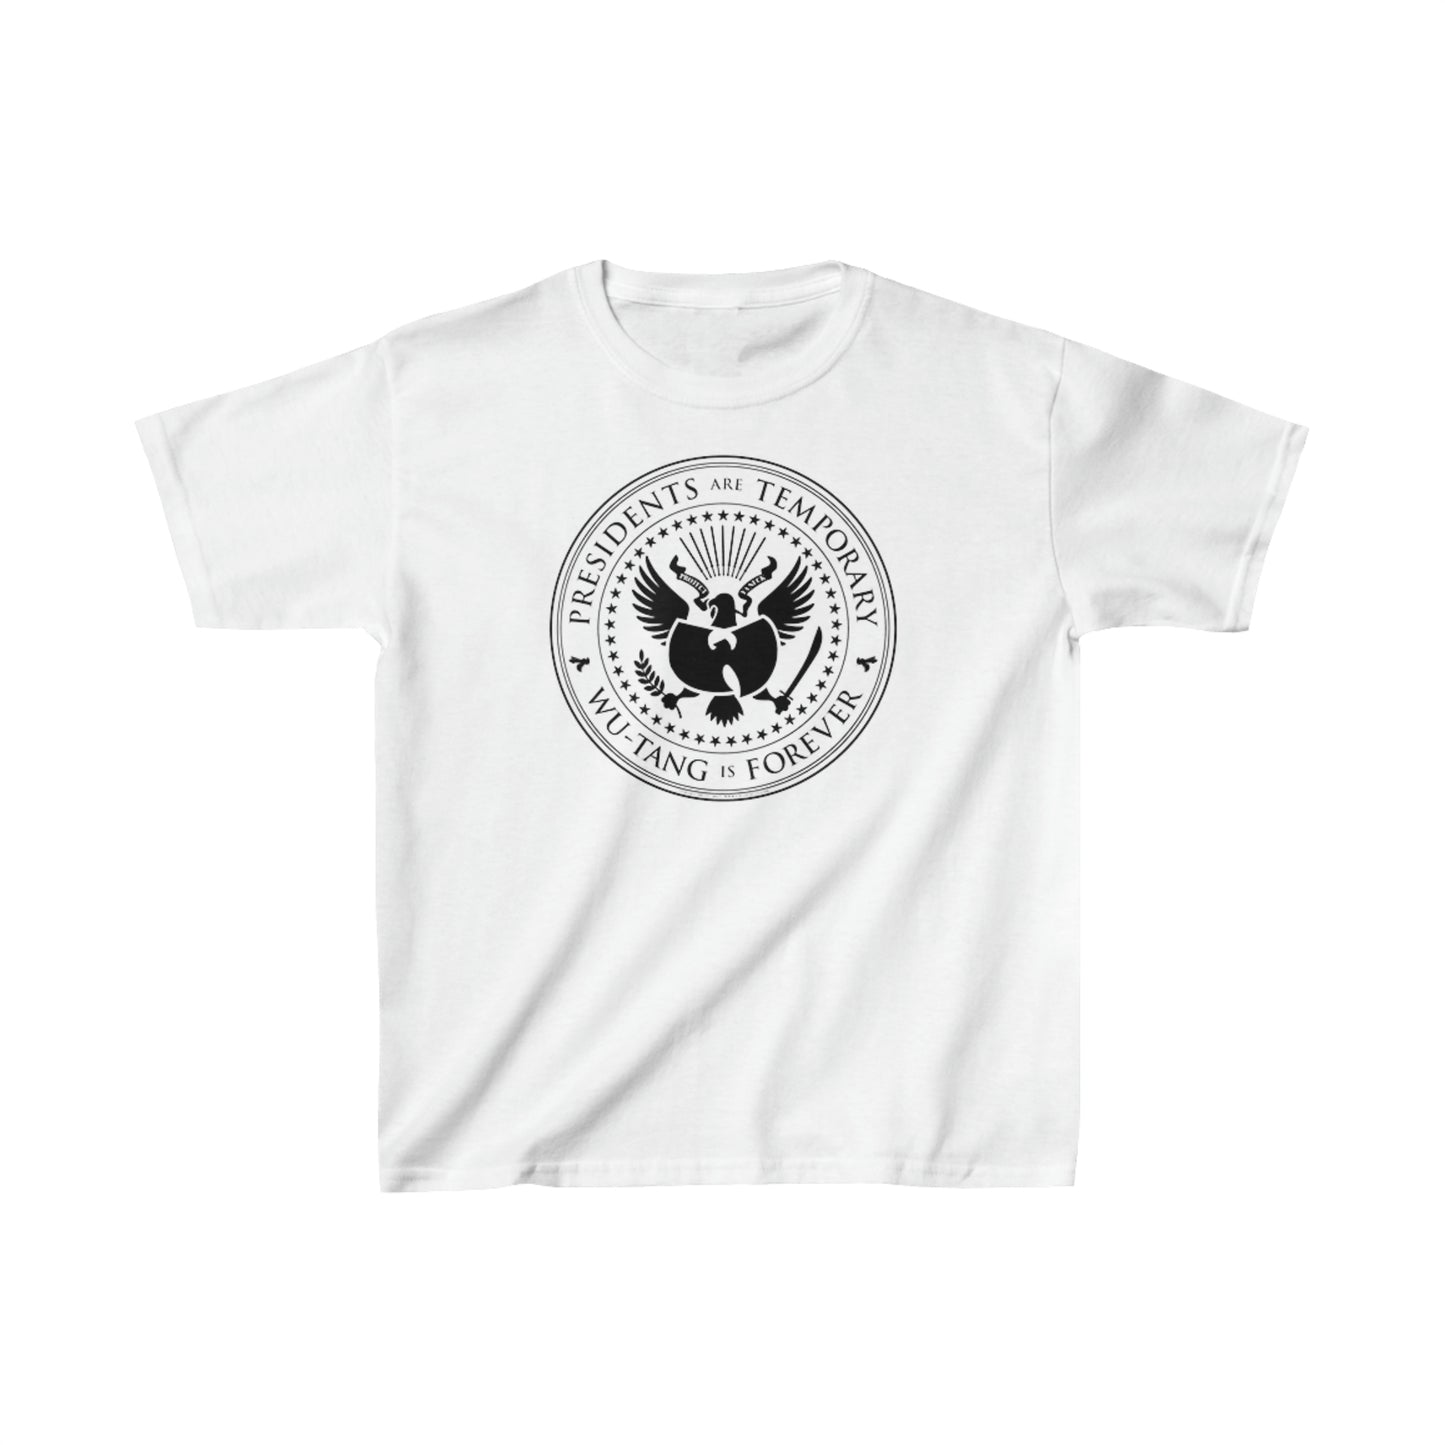 Presidents Are Temporary | Wutang Forever | Youth Tee